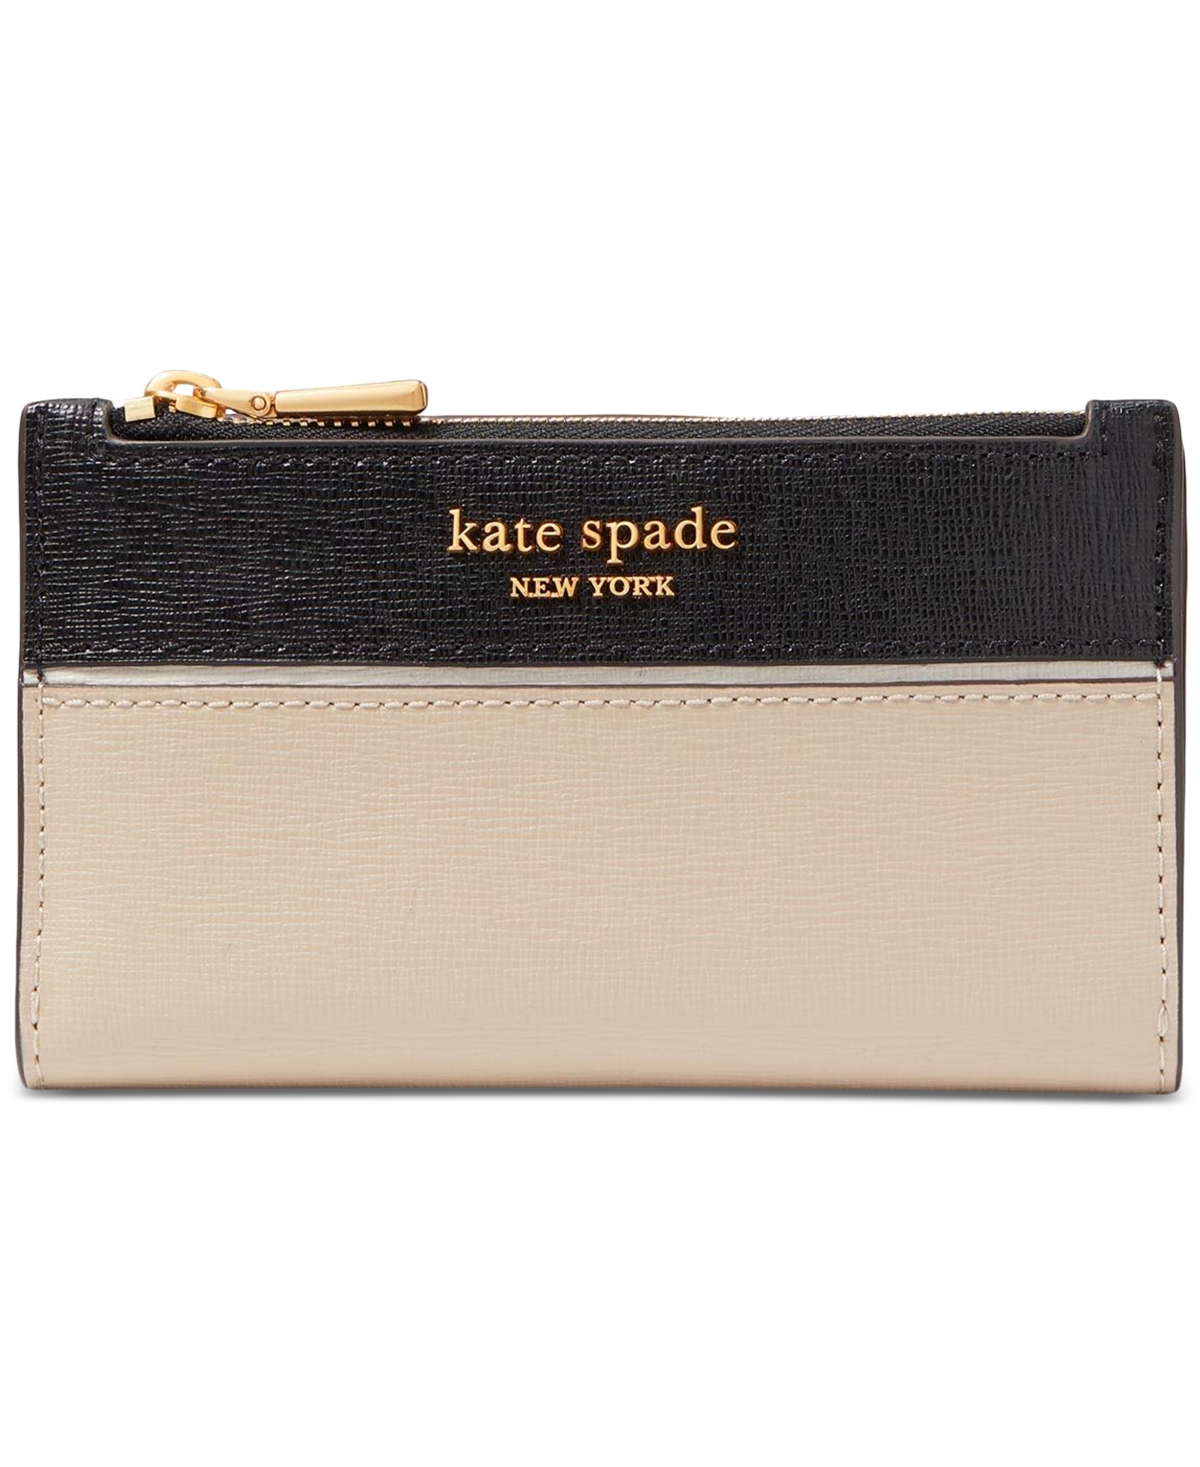 KATE SPADE MORGAN COLORBLOCKED SAFFIANO LEATHER SMALL SLIM BIFOLD WALLET